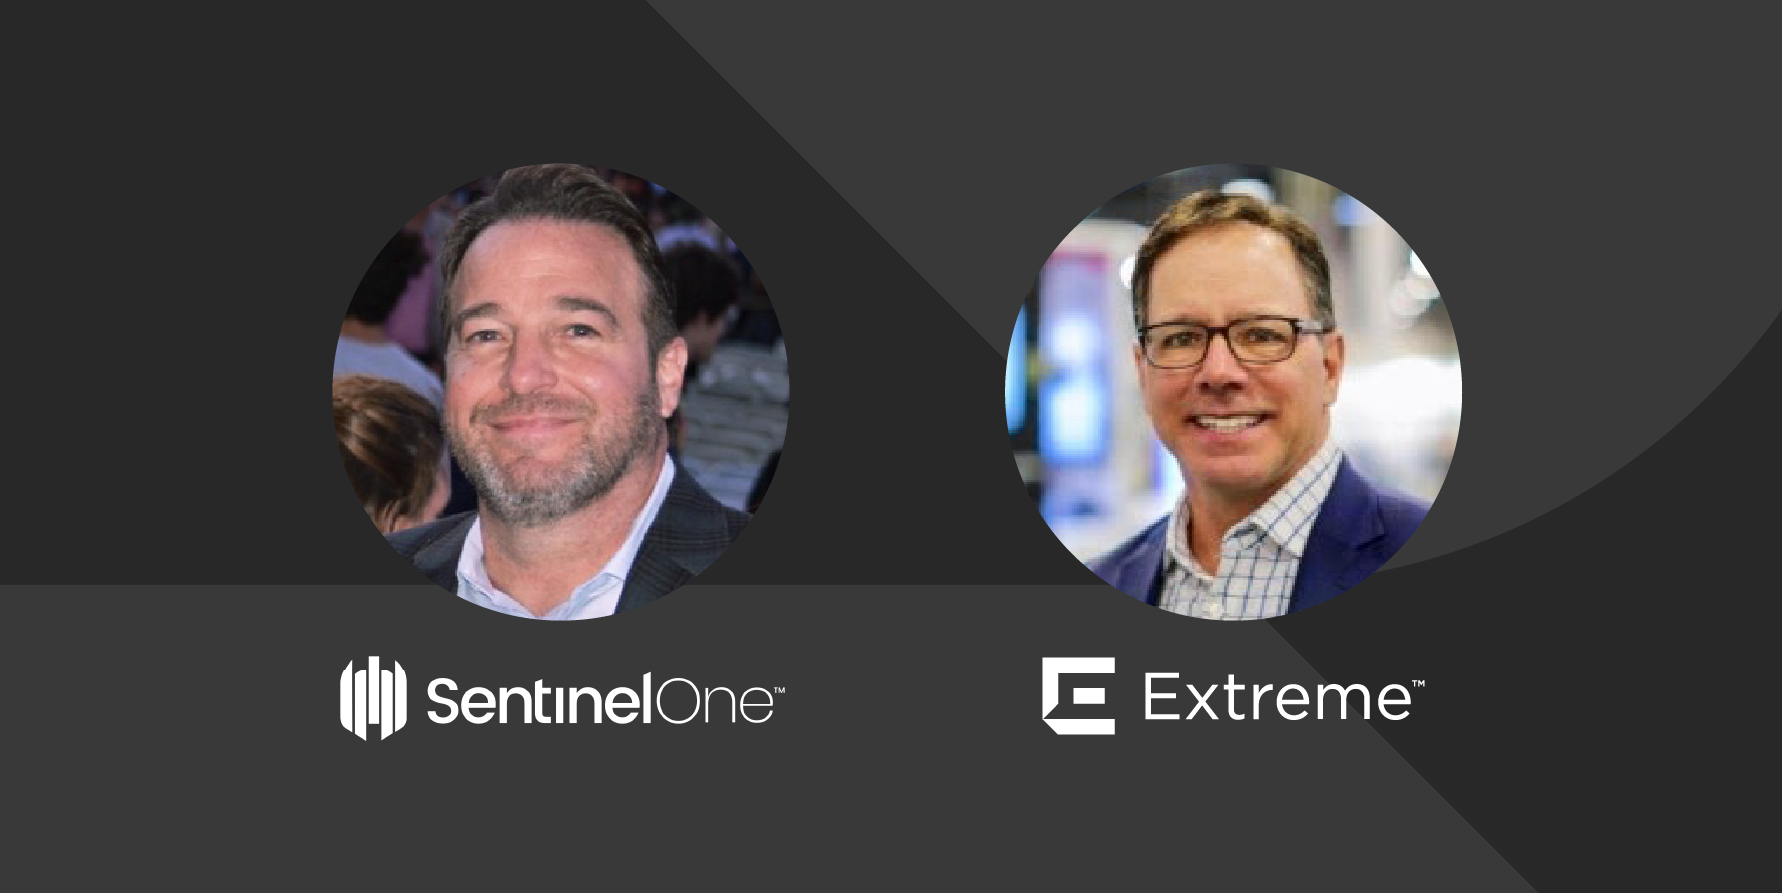 Headshots of Mark Parrinello, Senior Vice President of Worldwide Sales at SentinelOne, and Joe Vitalone, Chief Revenue Officer at Extreme Networks